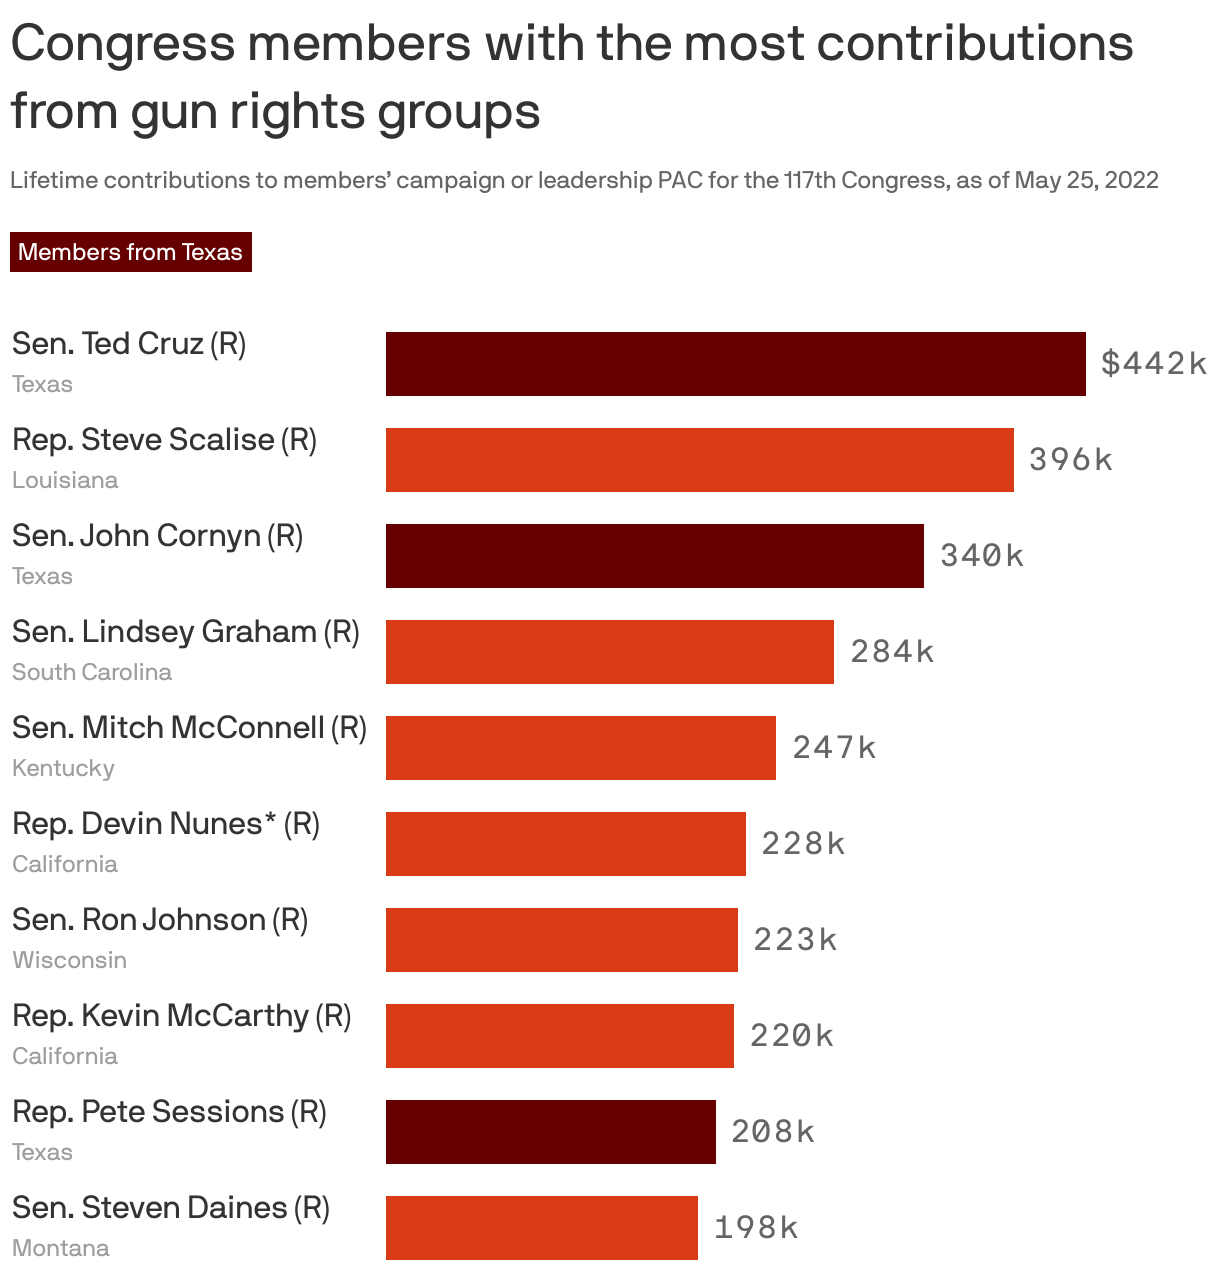 Congress members with the most contributions from gun rights groups